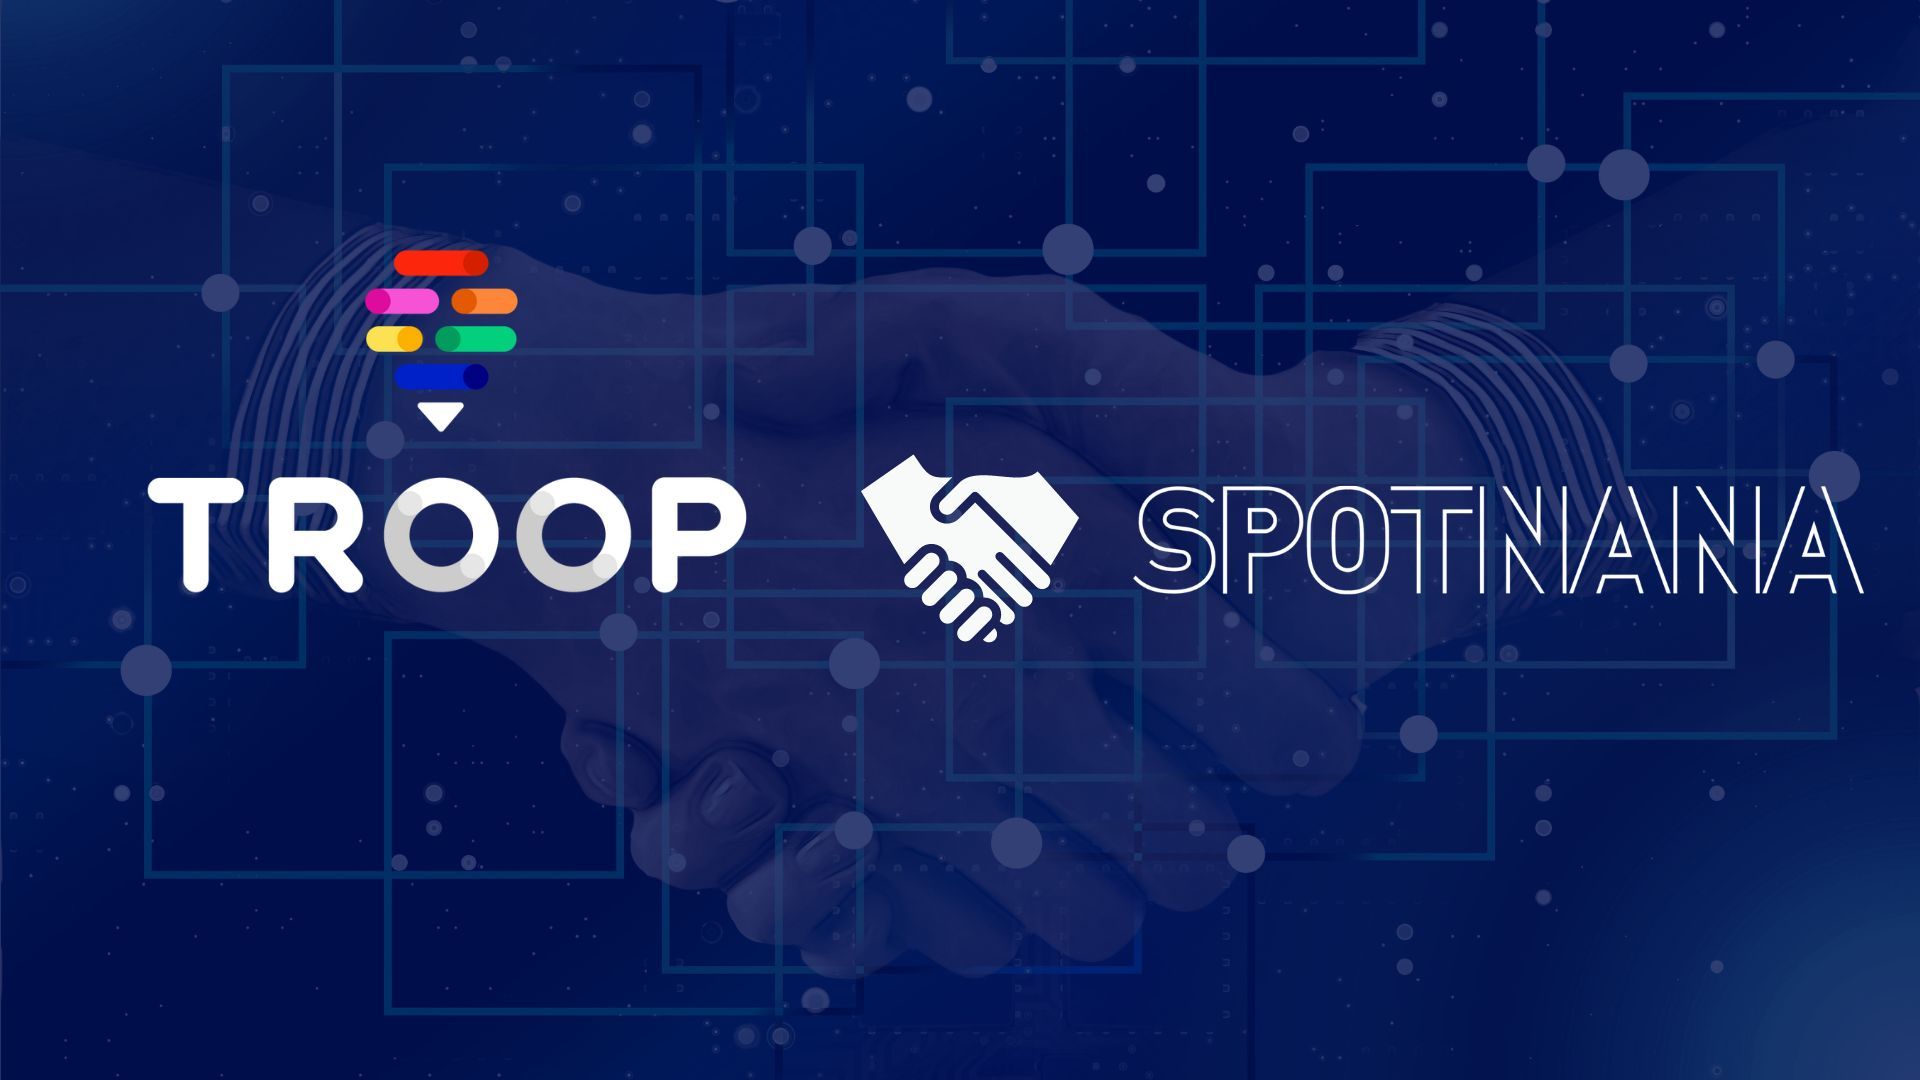 Meetings Management Platform TROOP to Roll Out Travel Booking Capabilities Through Spotnana Integration